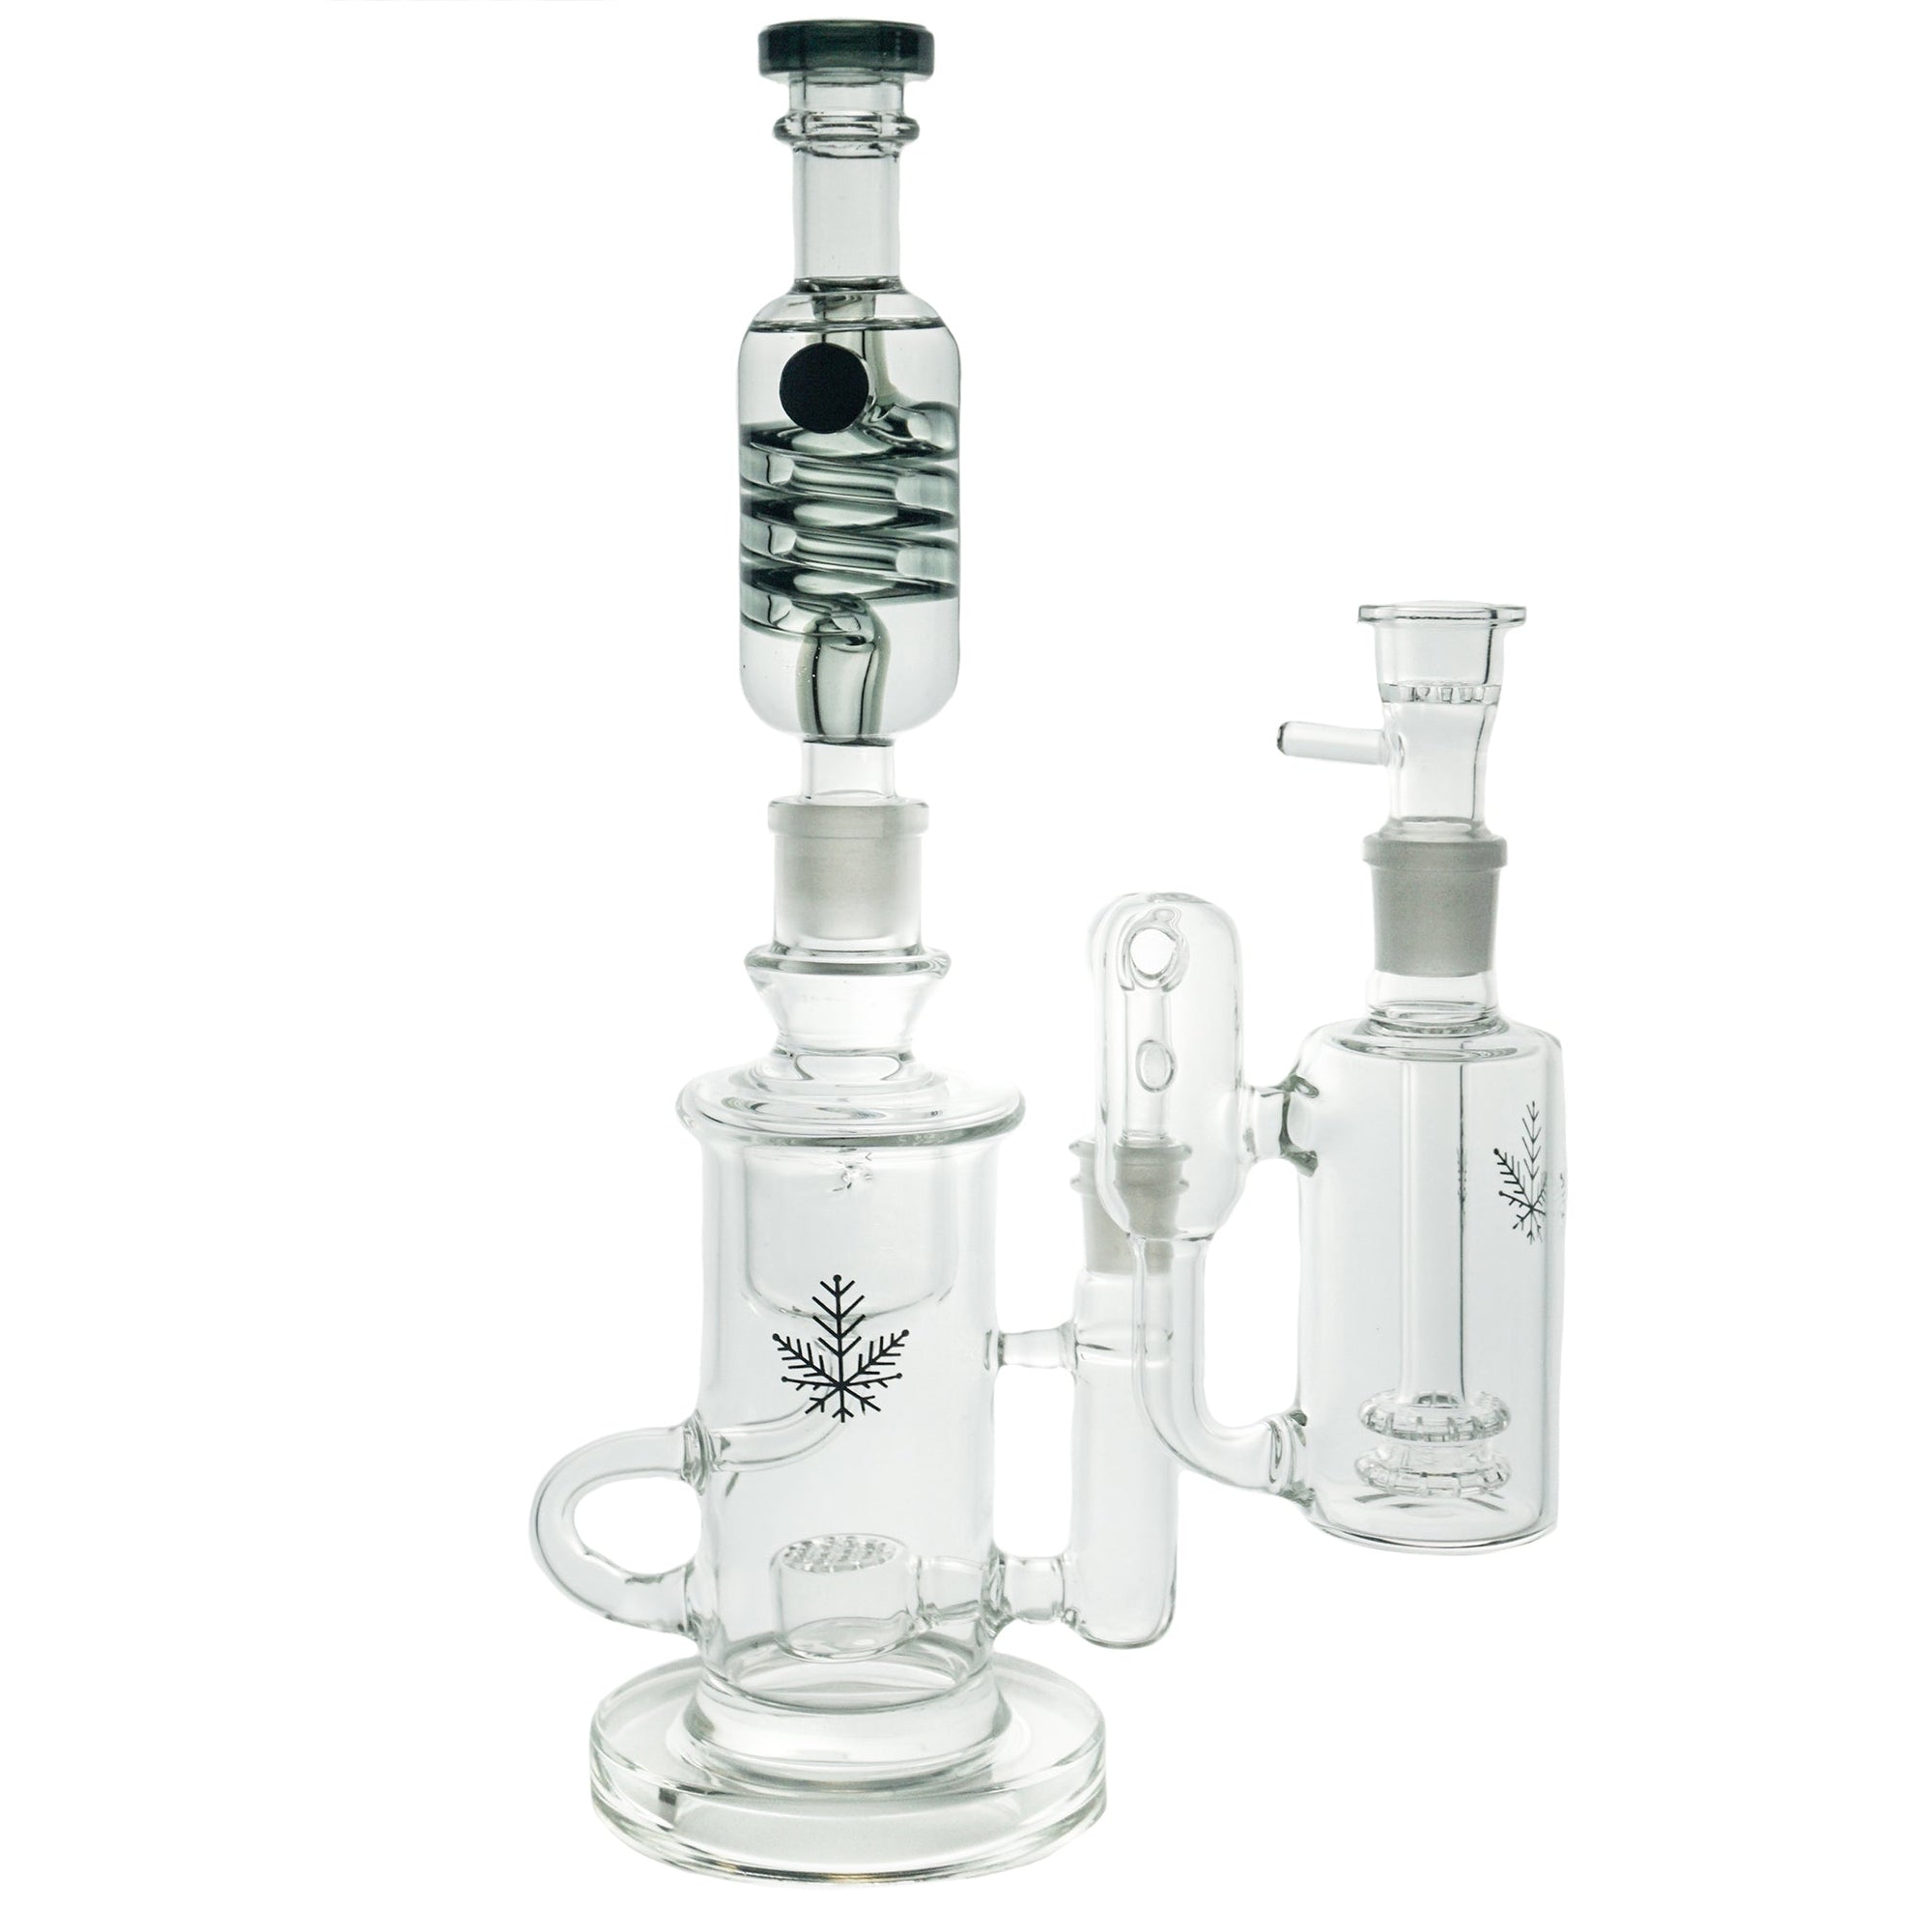 Freeze Pipe Ash Catcher (ONLINE ONLY)